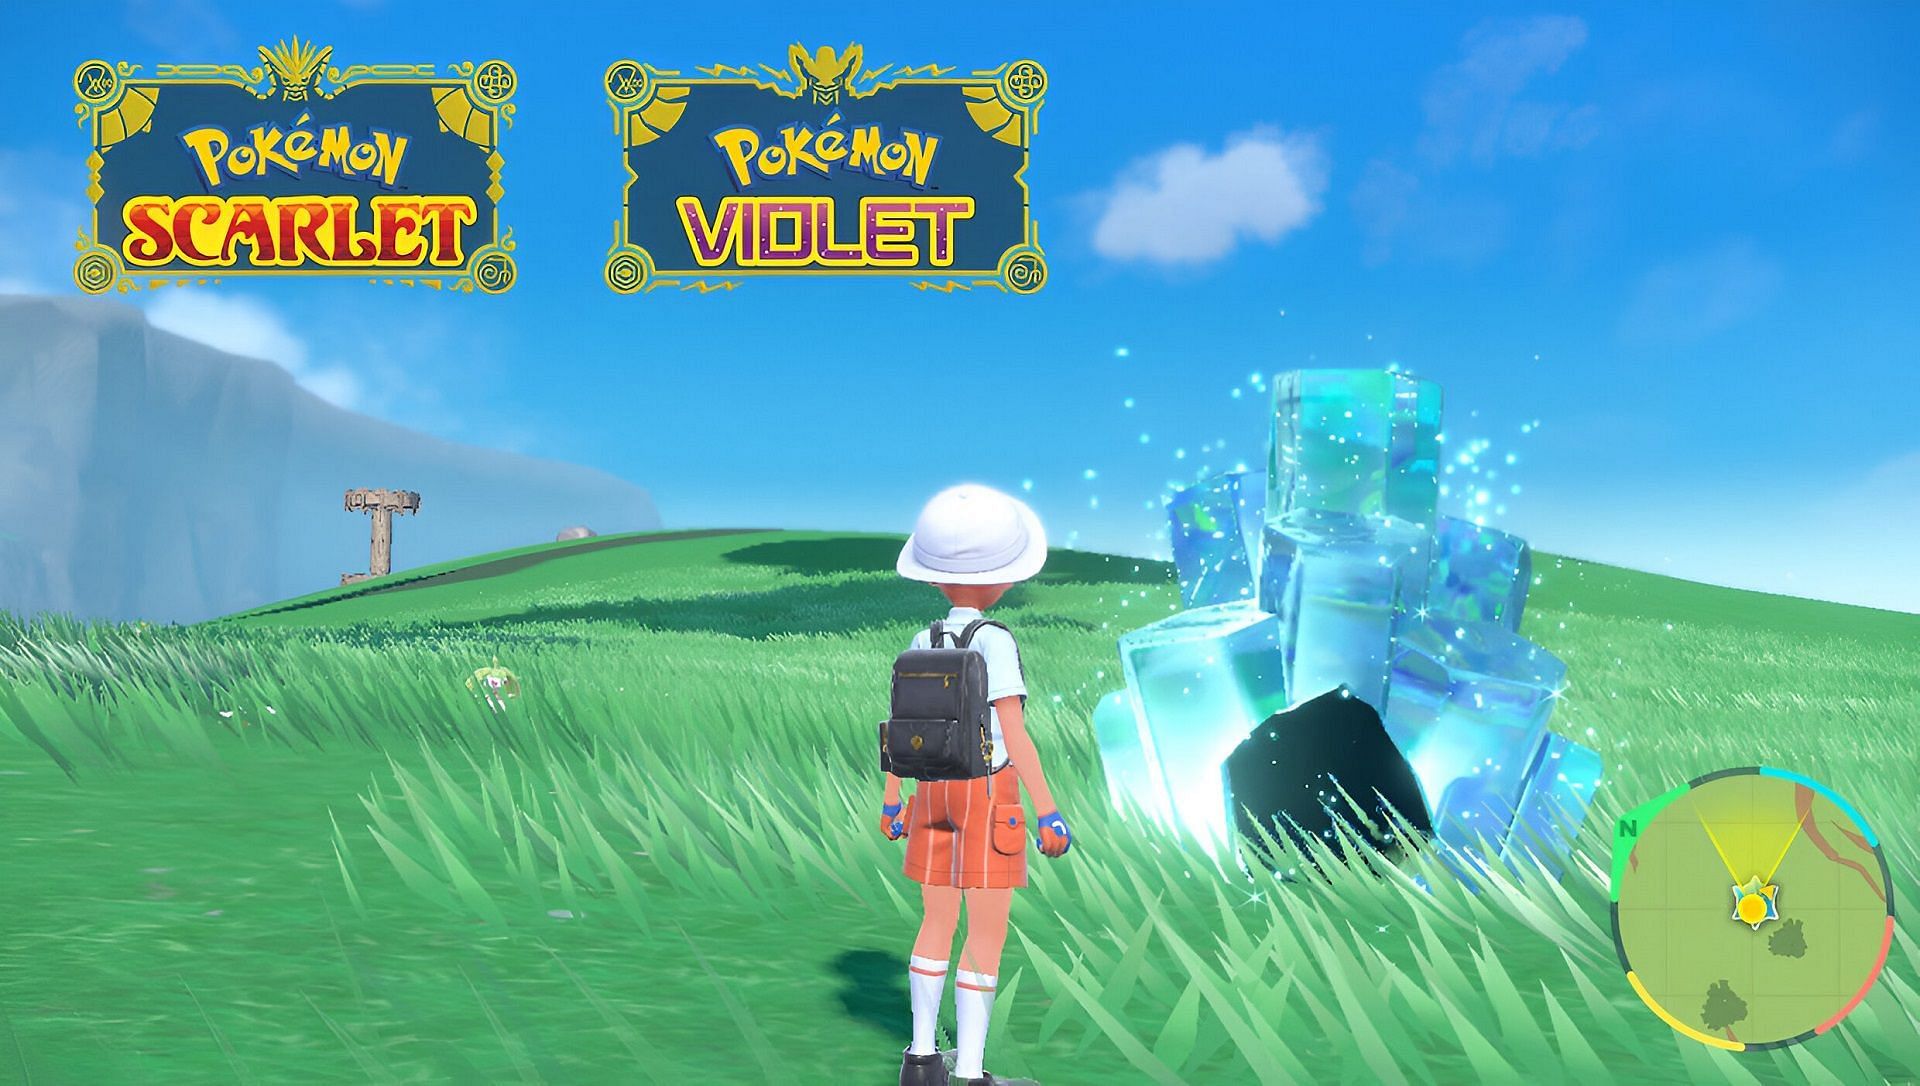 What are the best strategies to defeat 5-Star and 6-Star Tera Raids in Pokemon Scarlet and Violet?